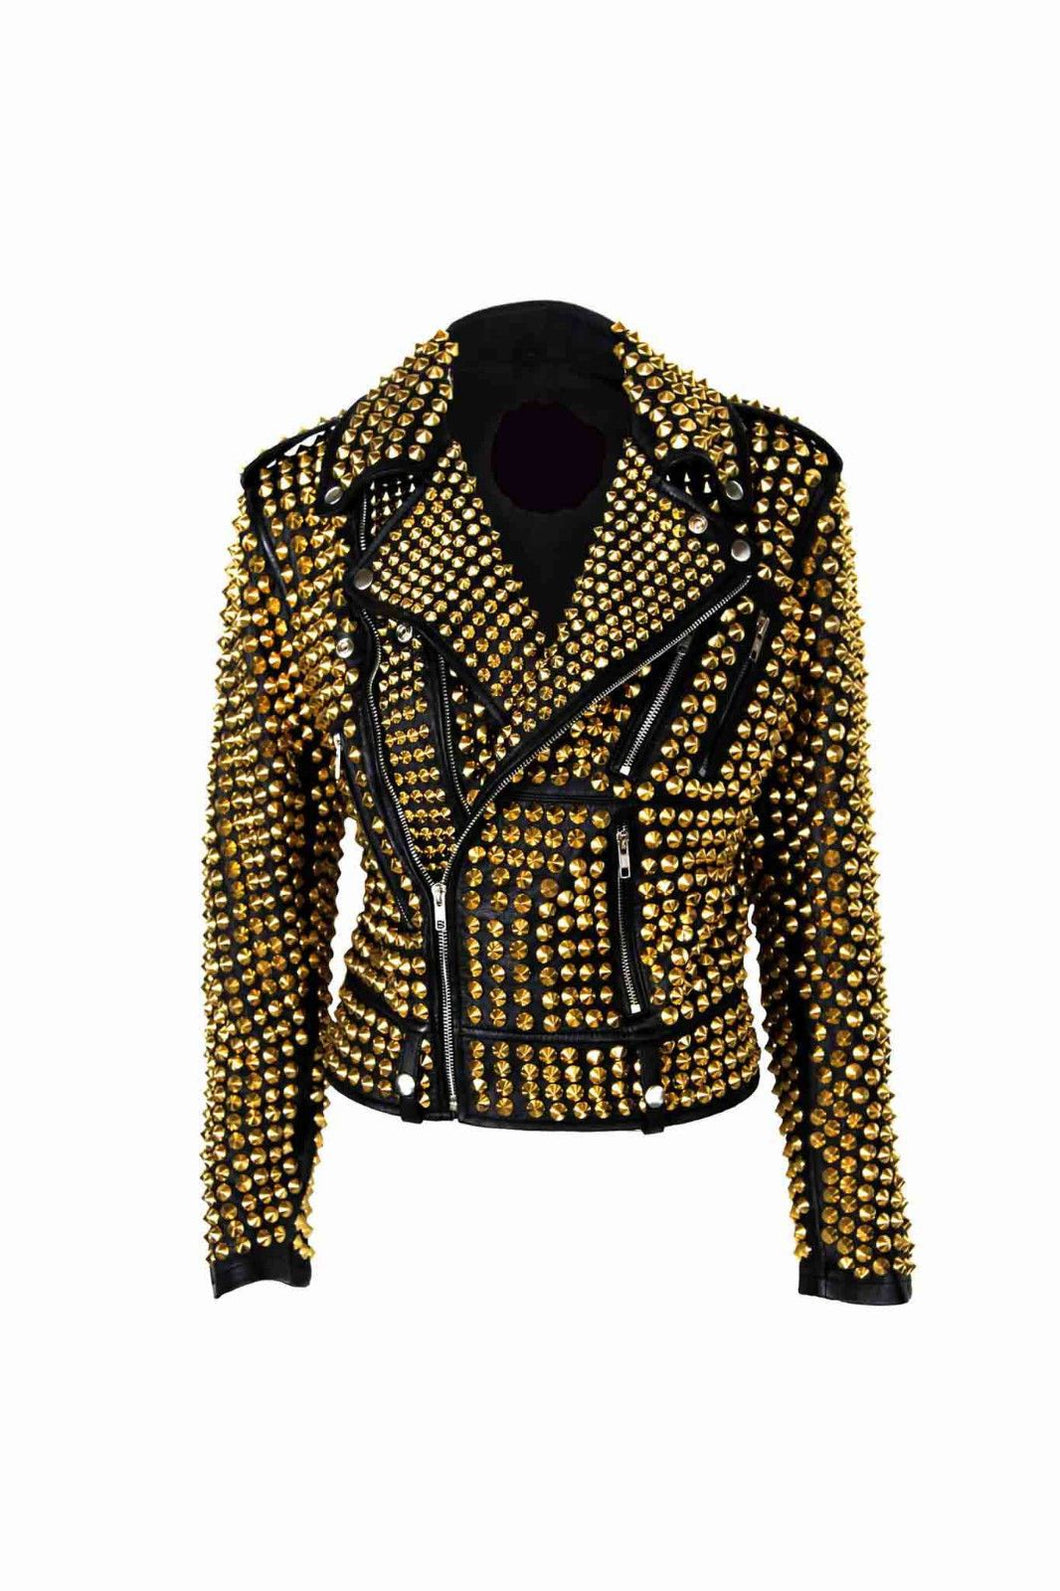 Woman Luxury Black Punk Golden Studded Cowhide Brando Leather Jacket - Shearling leather